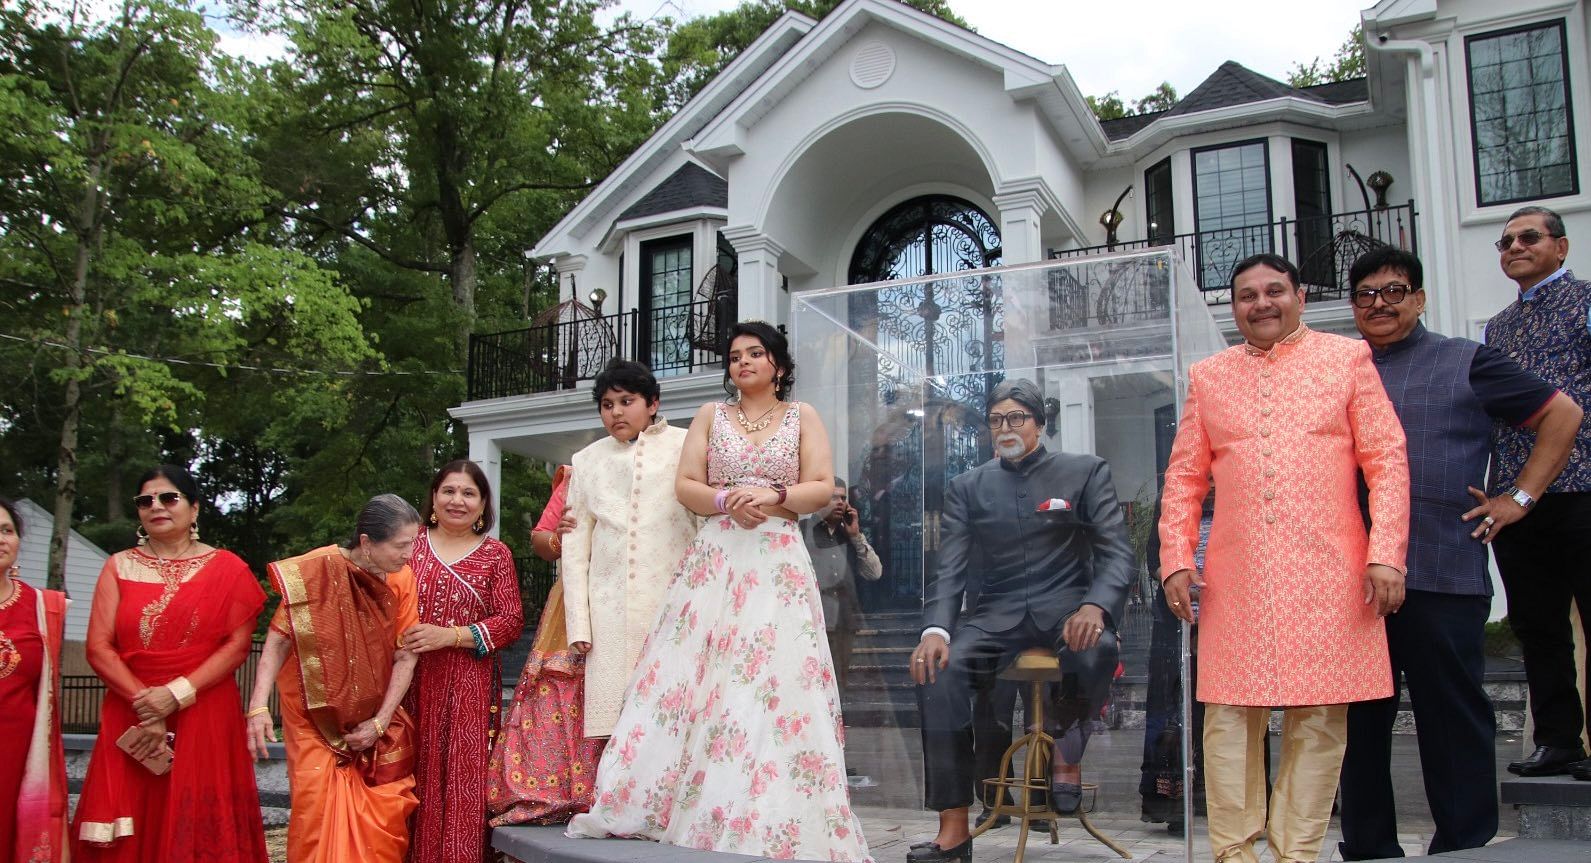 <div class="paragraphs"><p>Gopi Sheth with his family at the unveiling of Amitabh Bachchan's statue on Saturday, 27 August 2022, in Edison, New Jersey.&nbsp;</p></div>